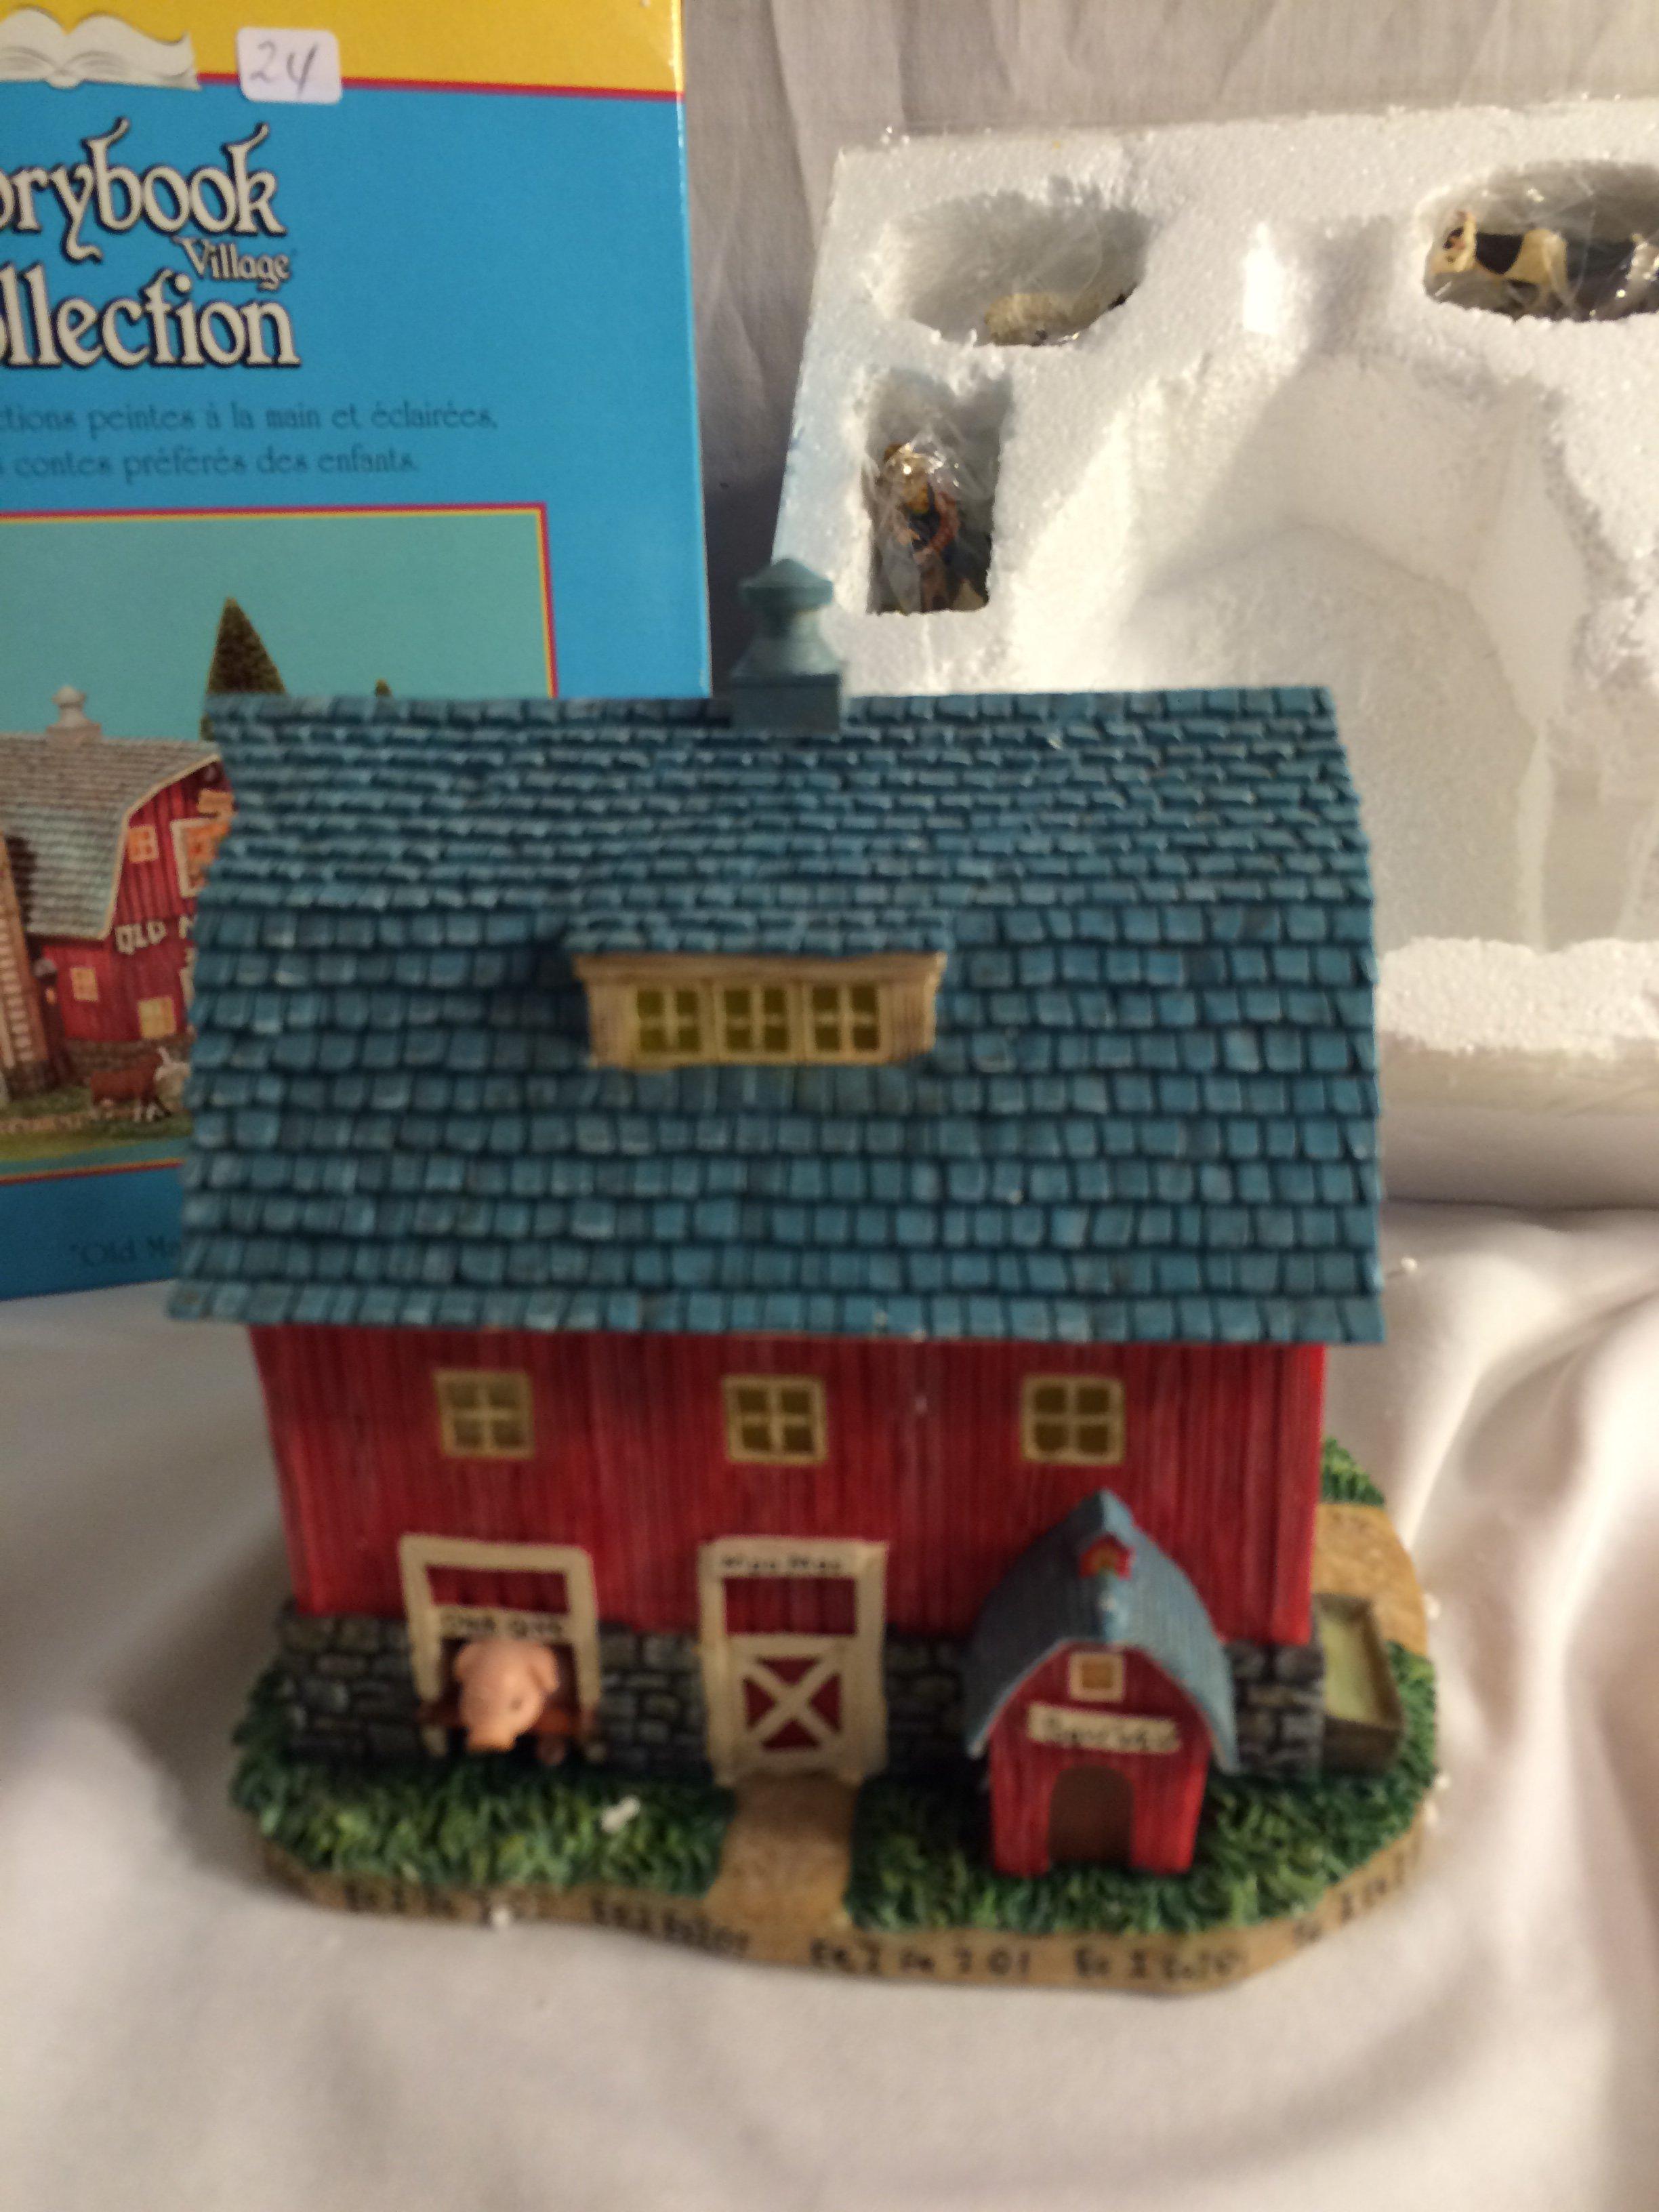 Storybook Village Collection "Old MacDonald's Farm"56.13244 Handpainted Lighted Building 11"t x9.5"